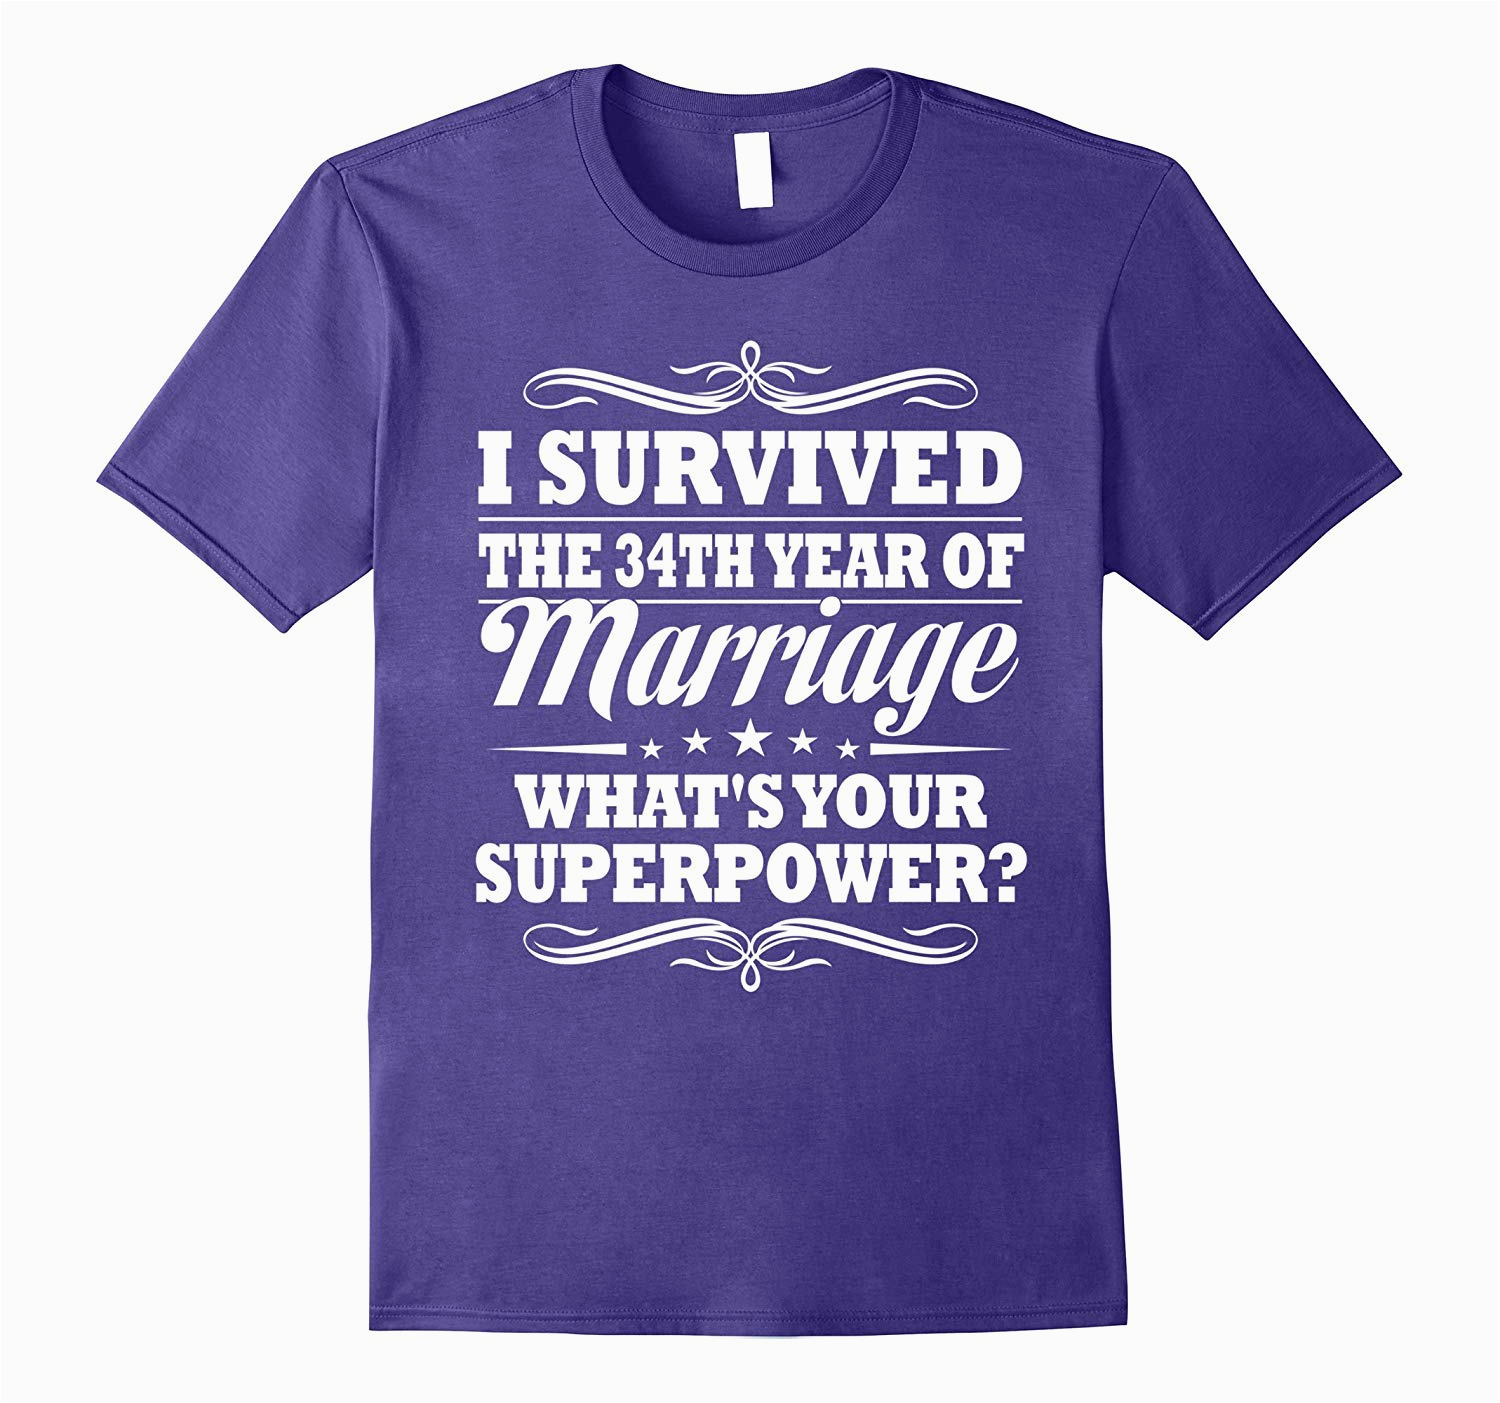 34th wedding anniversary gift ideas for her him i survived 4lvs